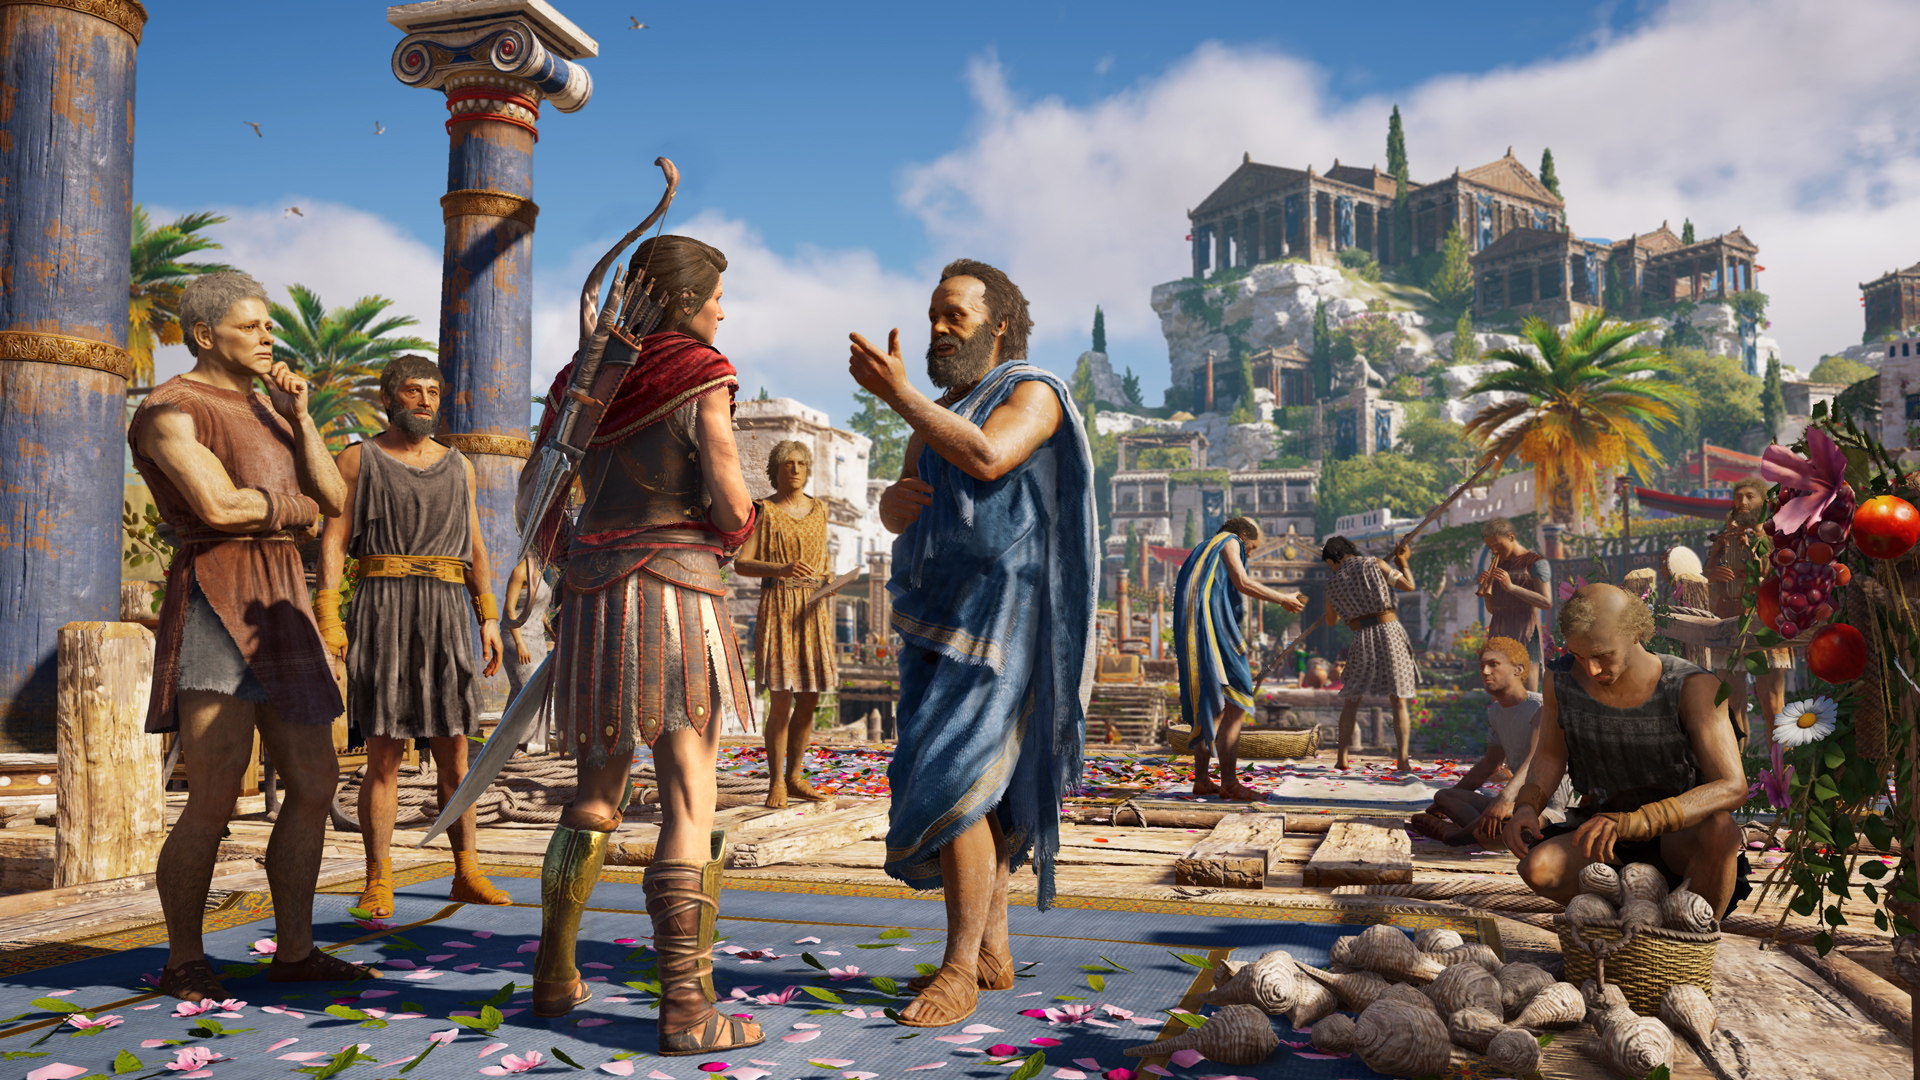 Save 75% on Assassin's Creed® Odyssey on Steam